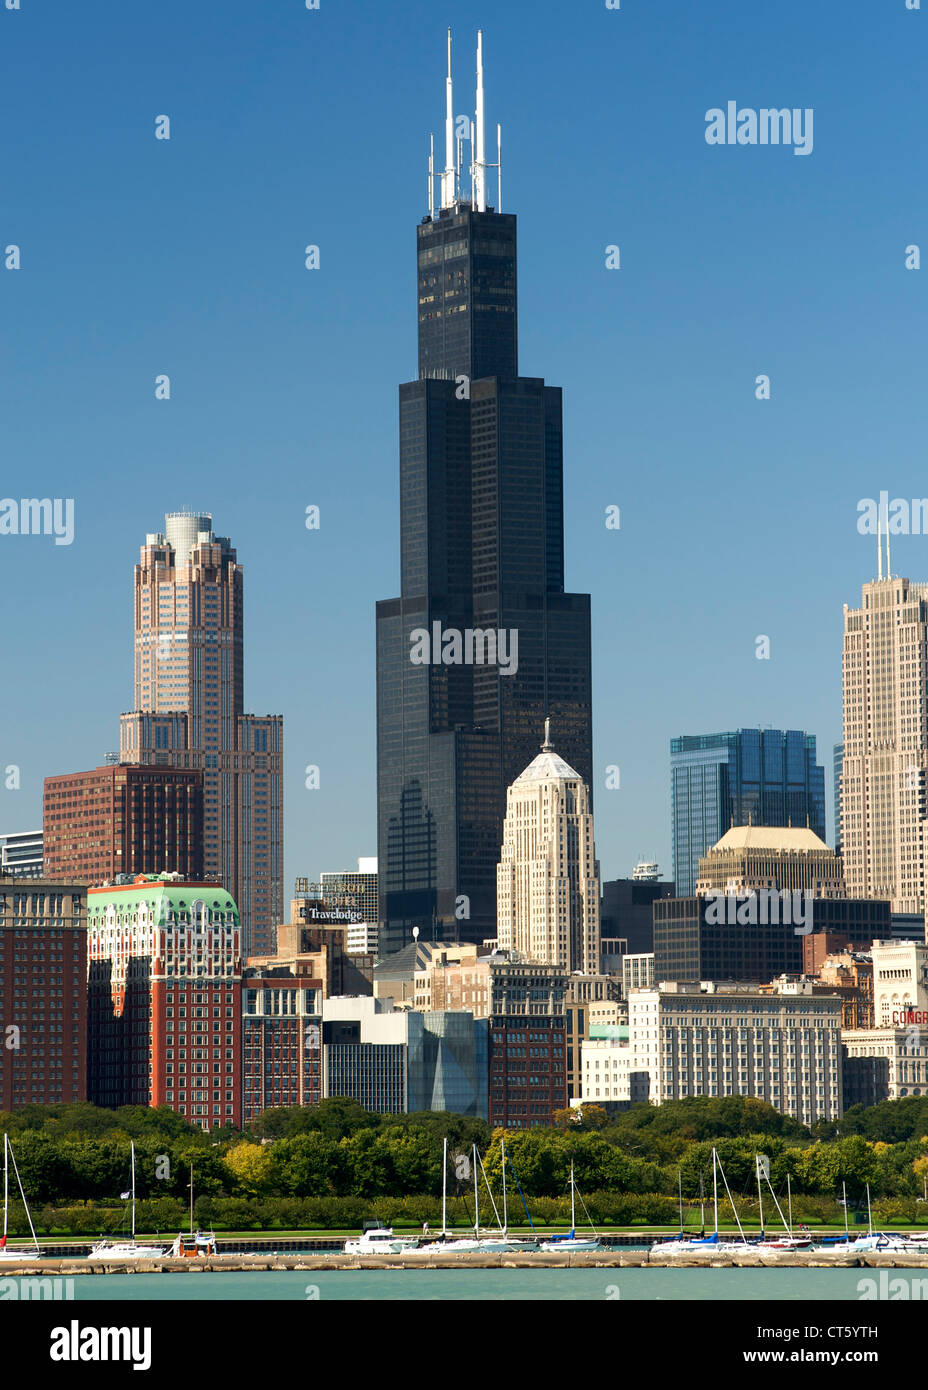 The Willis Tower in Chicago, Illinois, USA. It is 110 storeys high and was formerly called the Sears Tower. Stock Photo